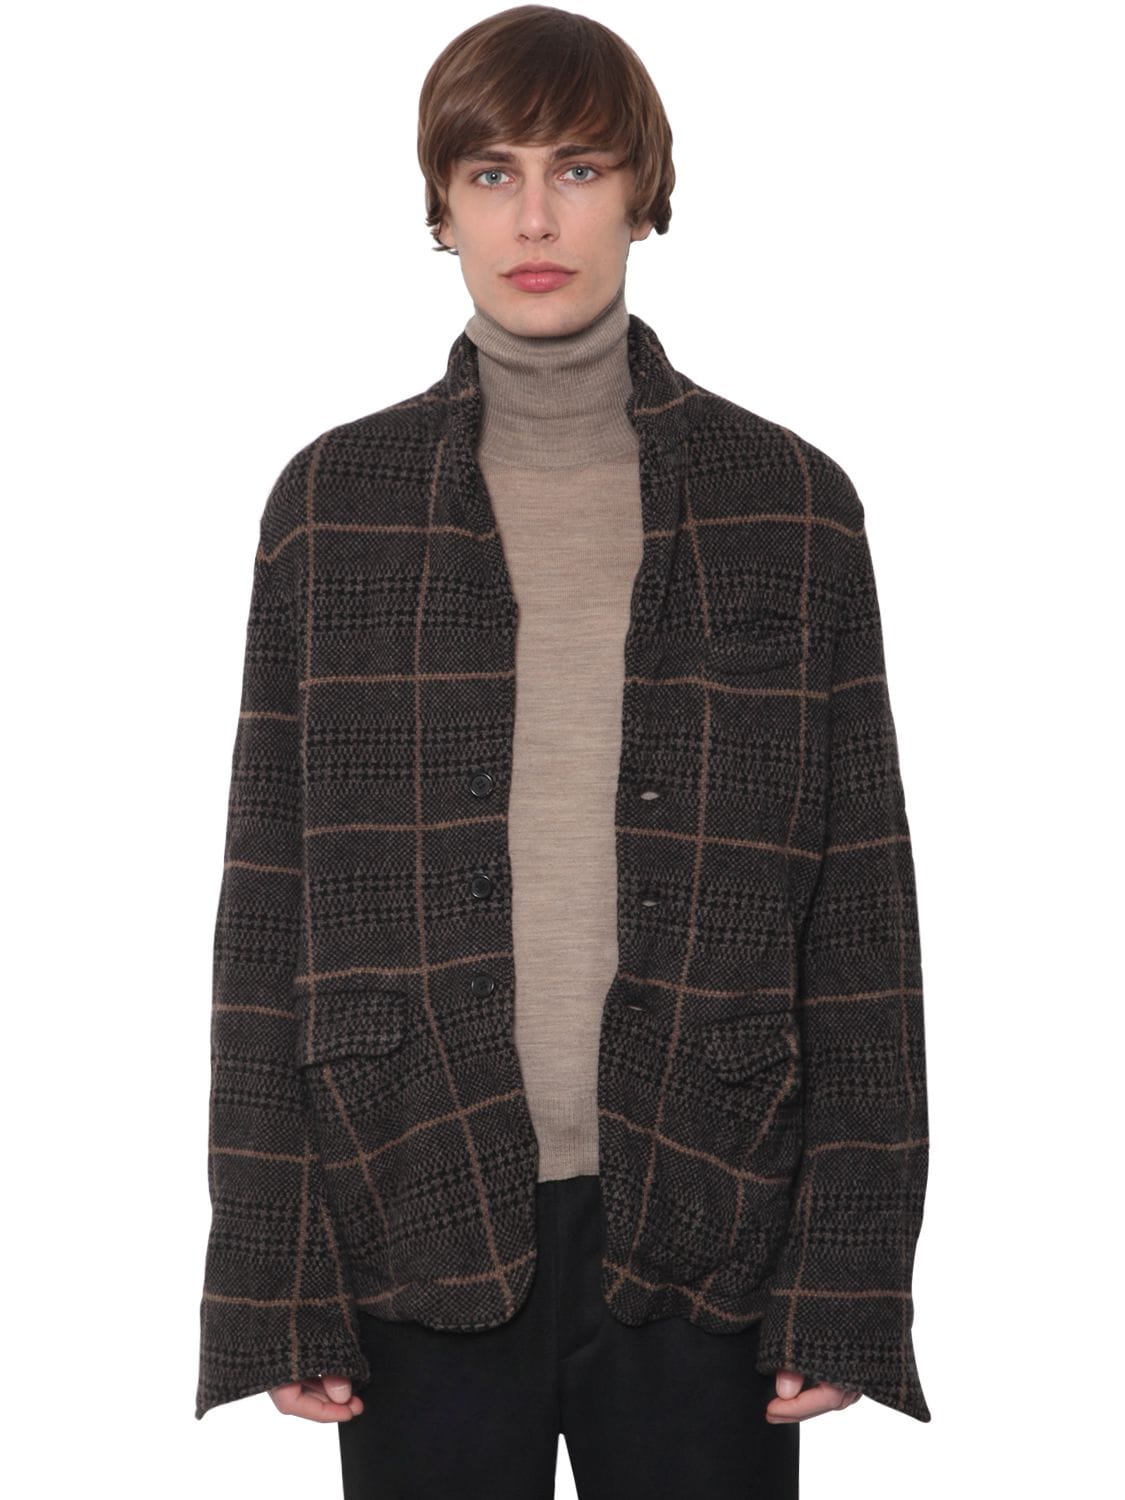 UNDERCOVER - Checked wool jacket - Grey Charcoal | Luisaviaroma